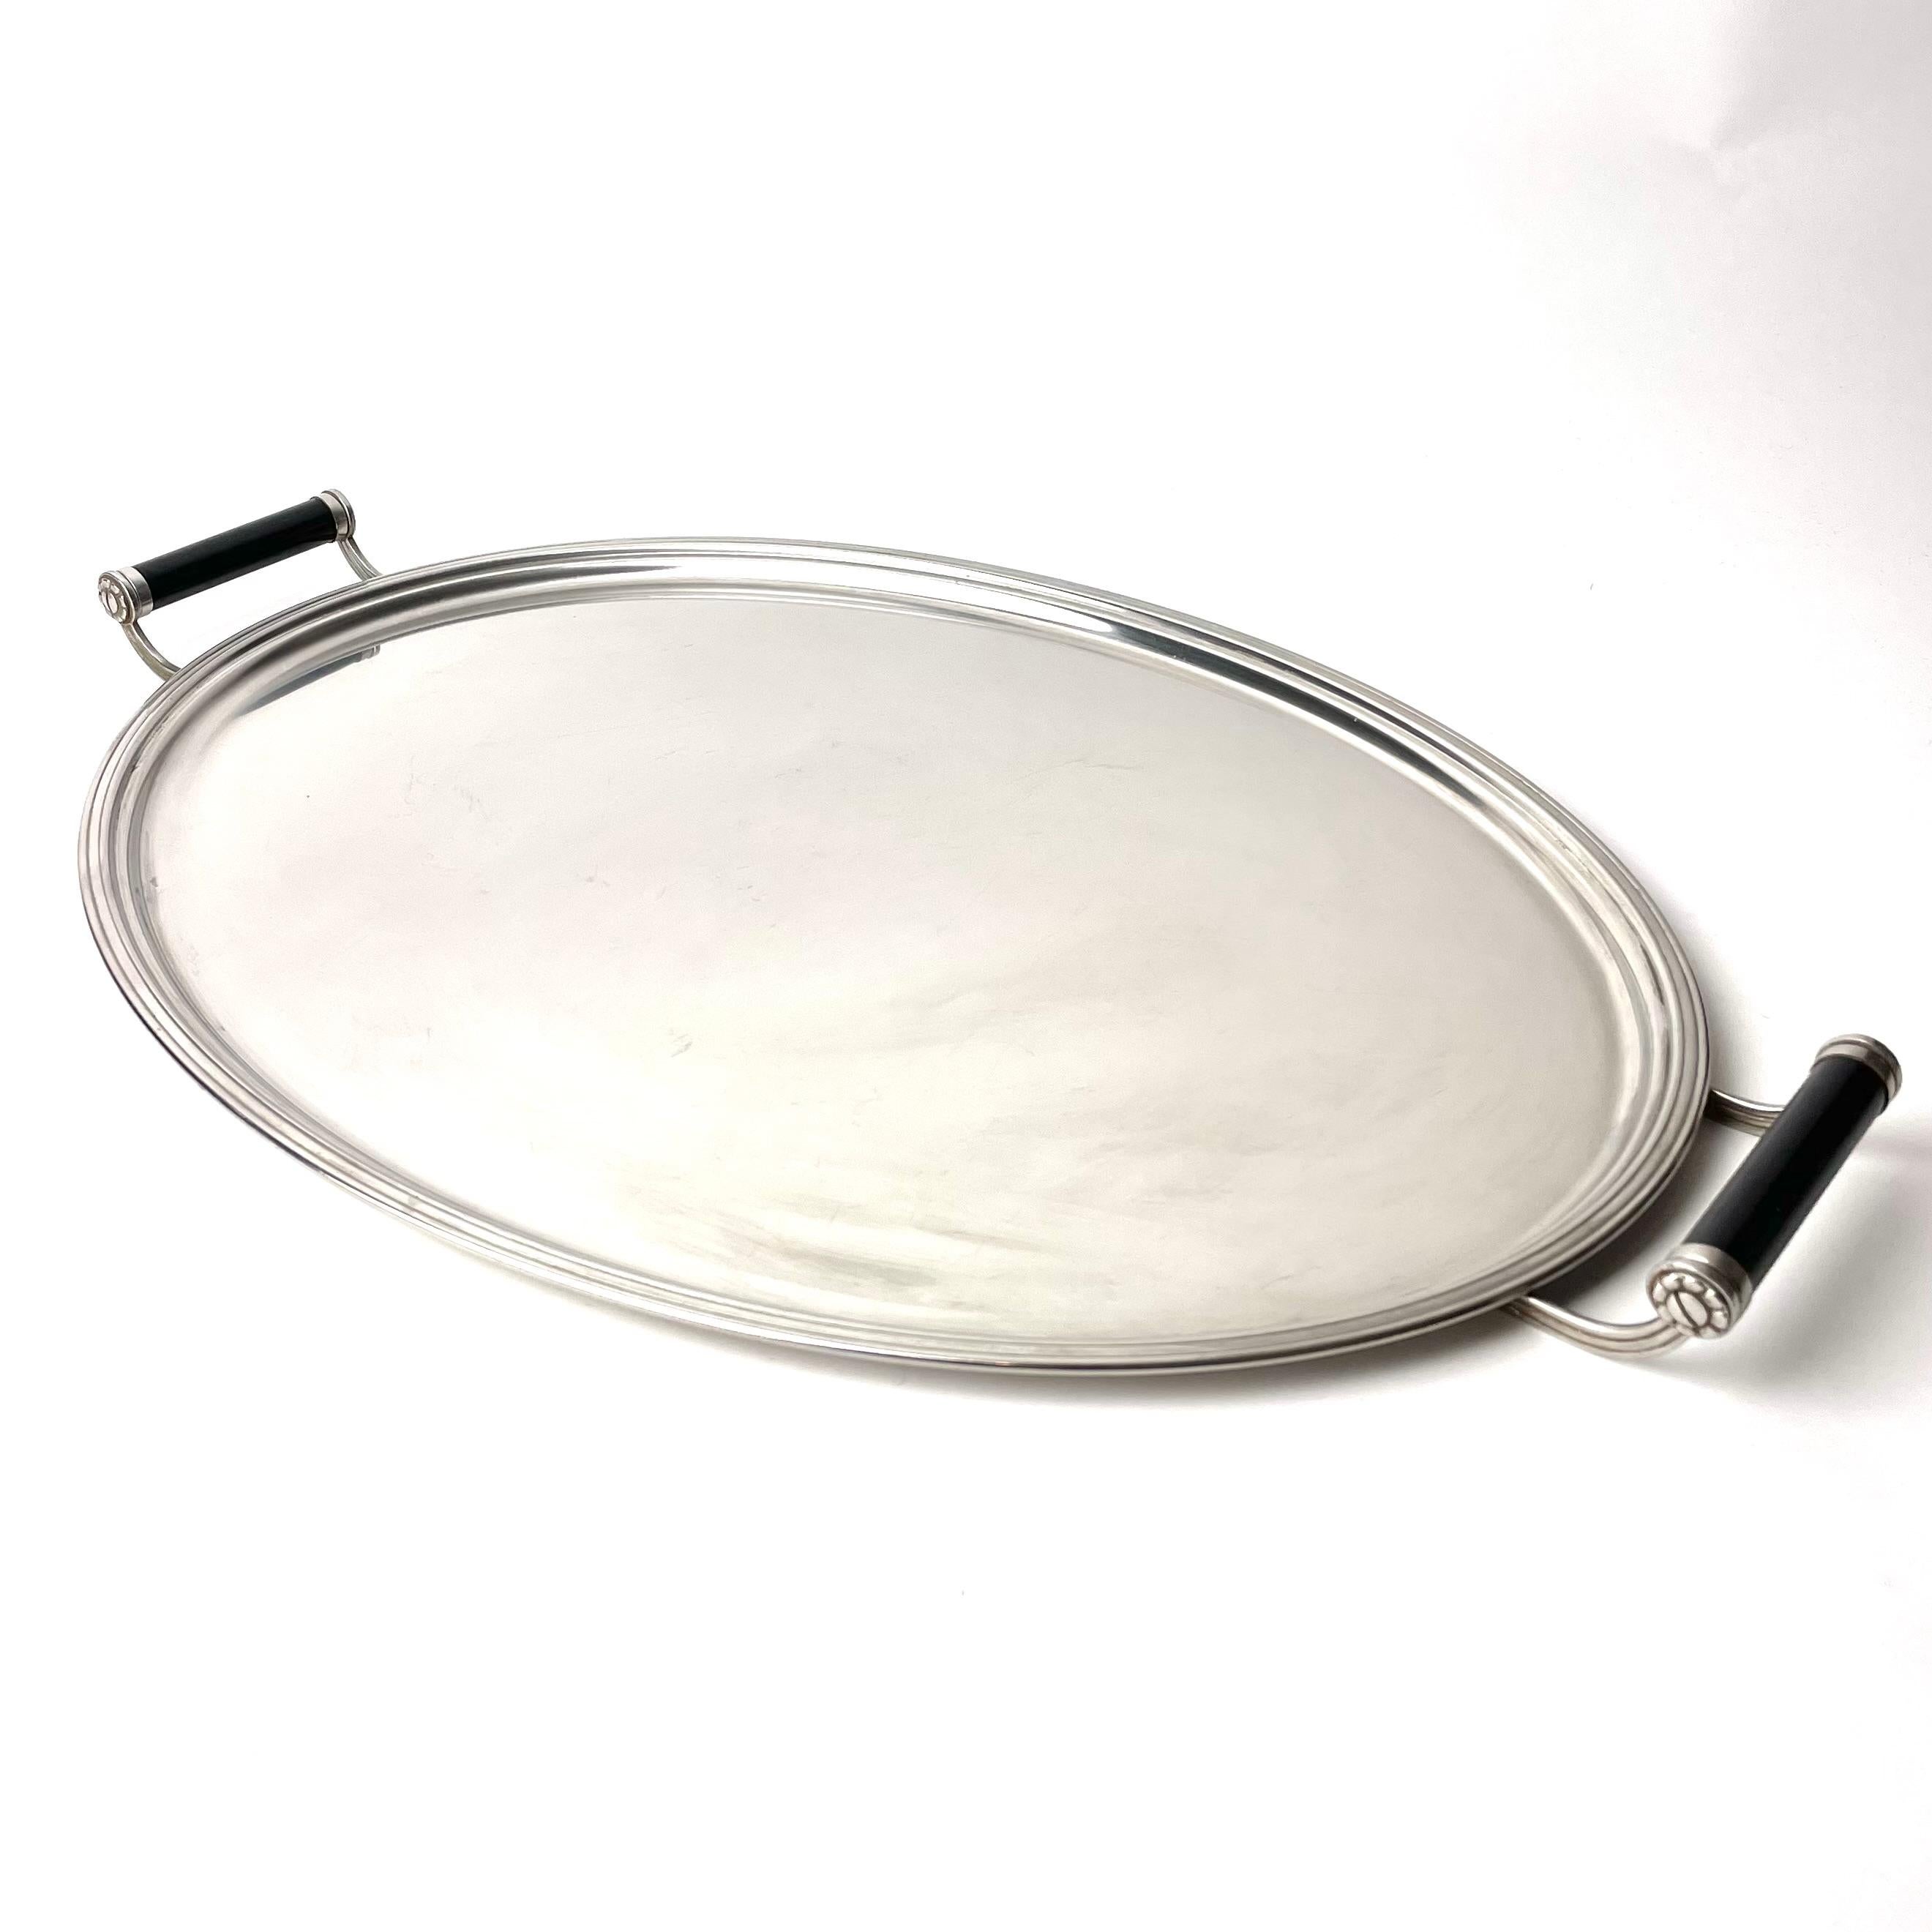 Refined Swedish Grace Tray, Stainless Steel with Bakelite handles, Gense 1930s Sweden.

Made in Sweden during the 1930s in the popular and refined Swedish Grace. Designed and produced by the famous Swedish company Gense, based in Eskilstuna, Sweden.